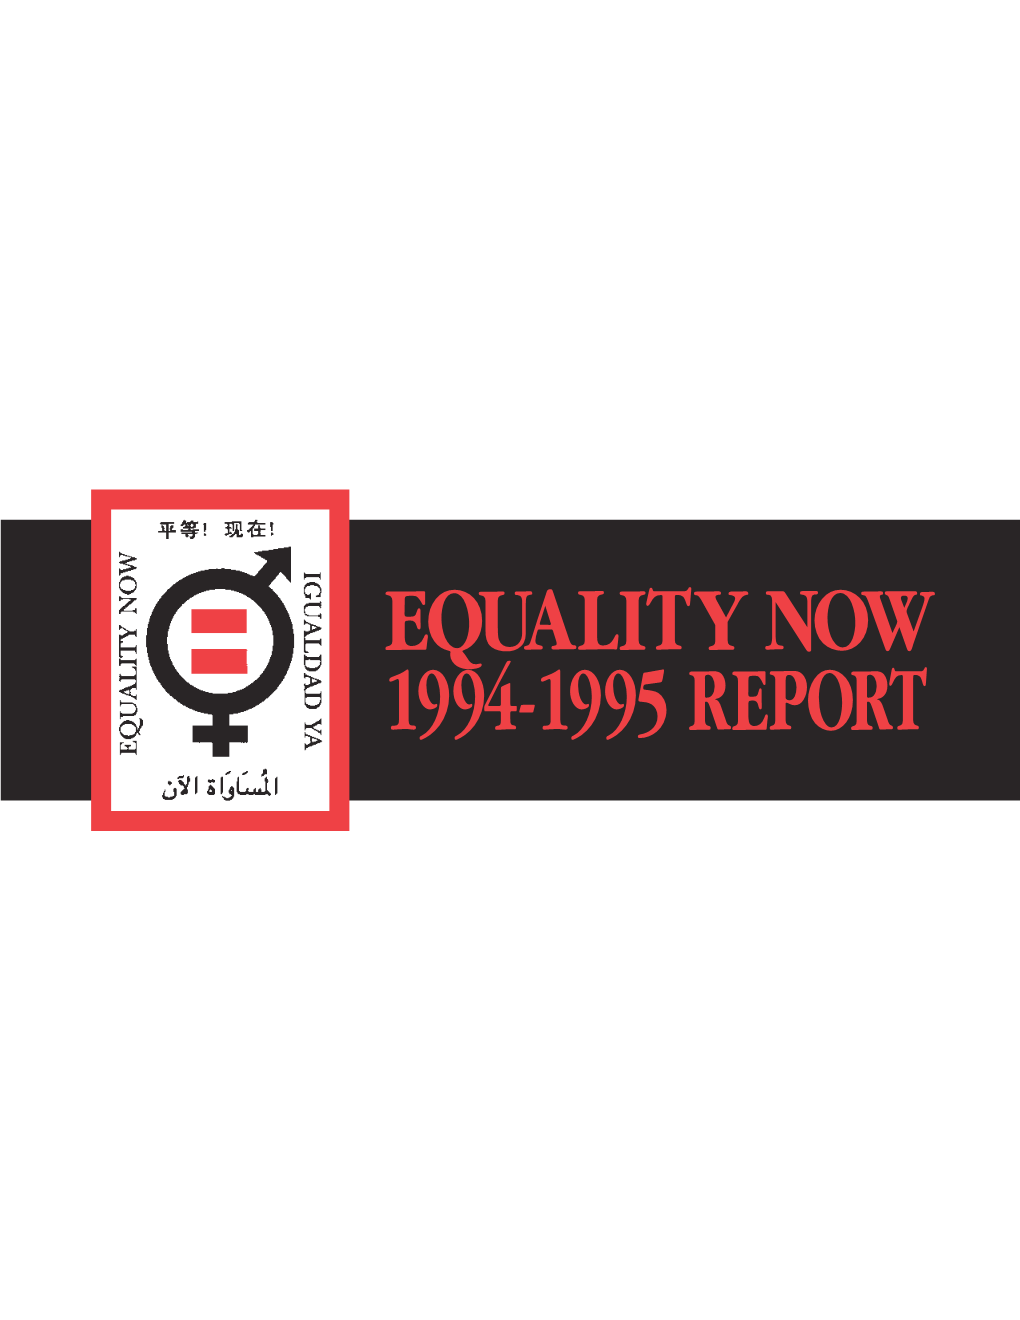 Equality Now 1994-1995 Report Equality Now